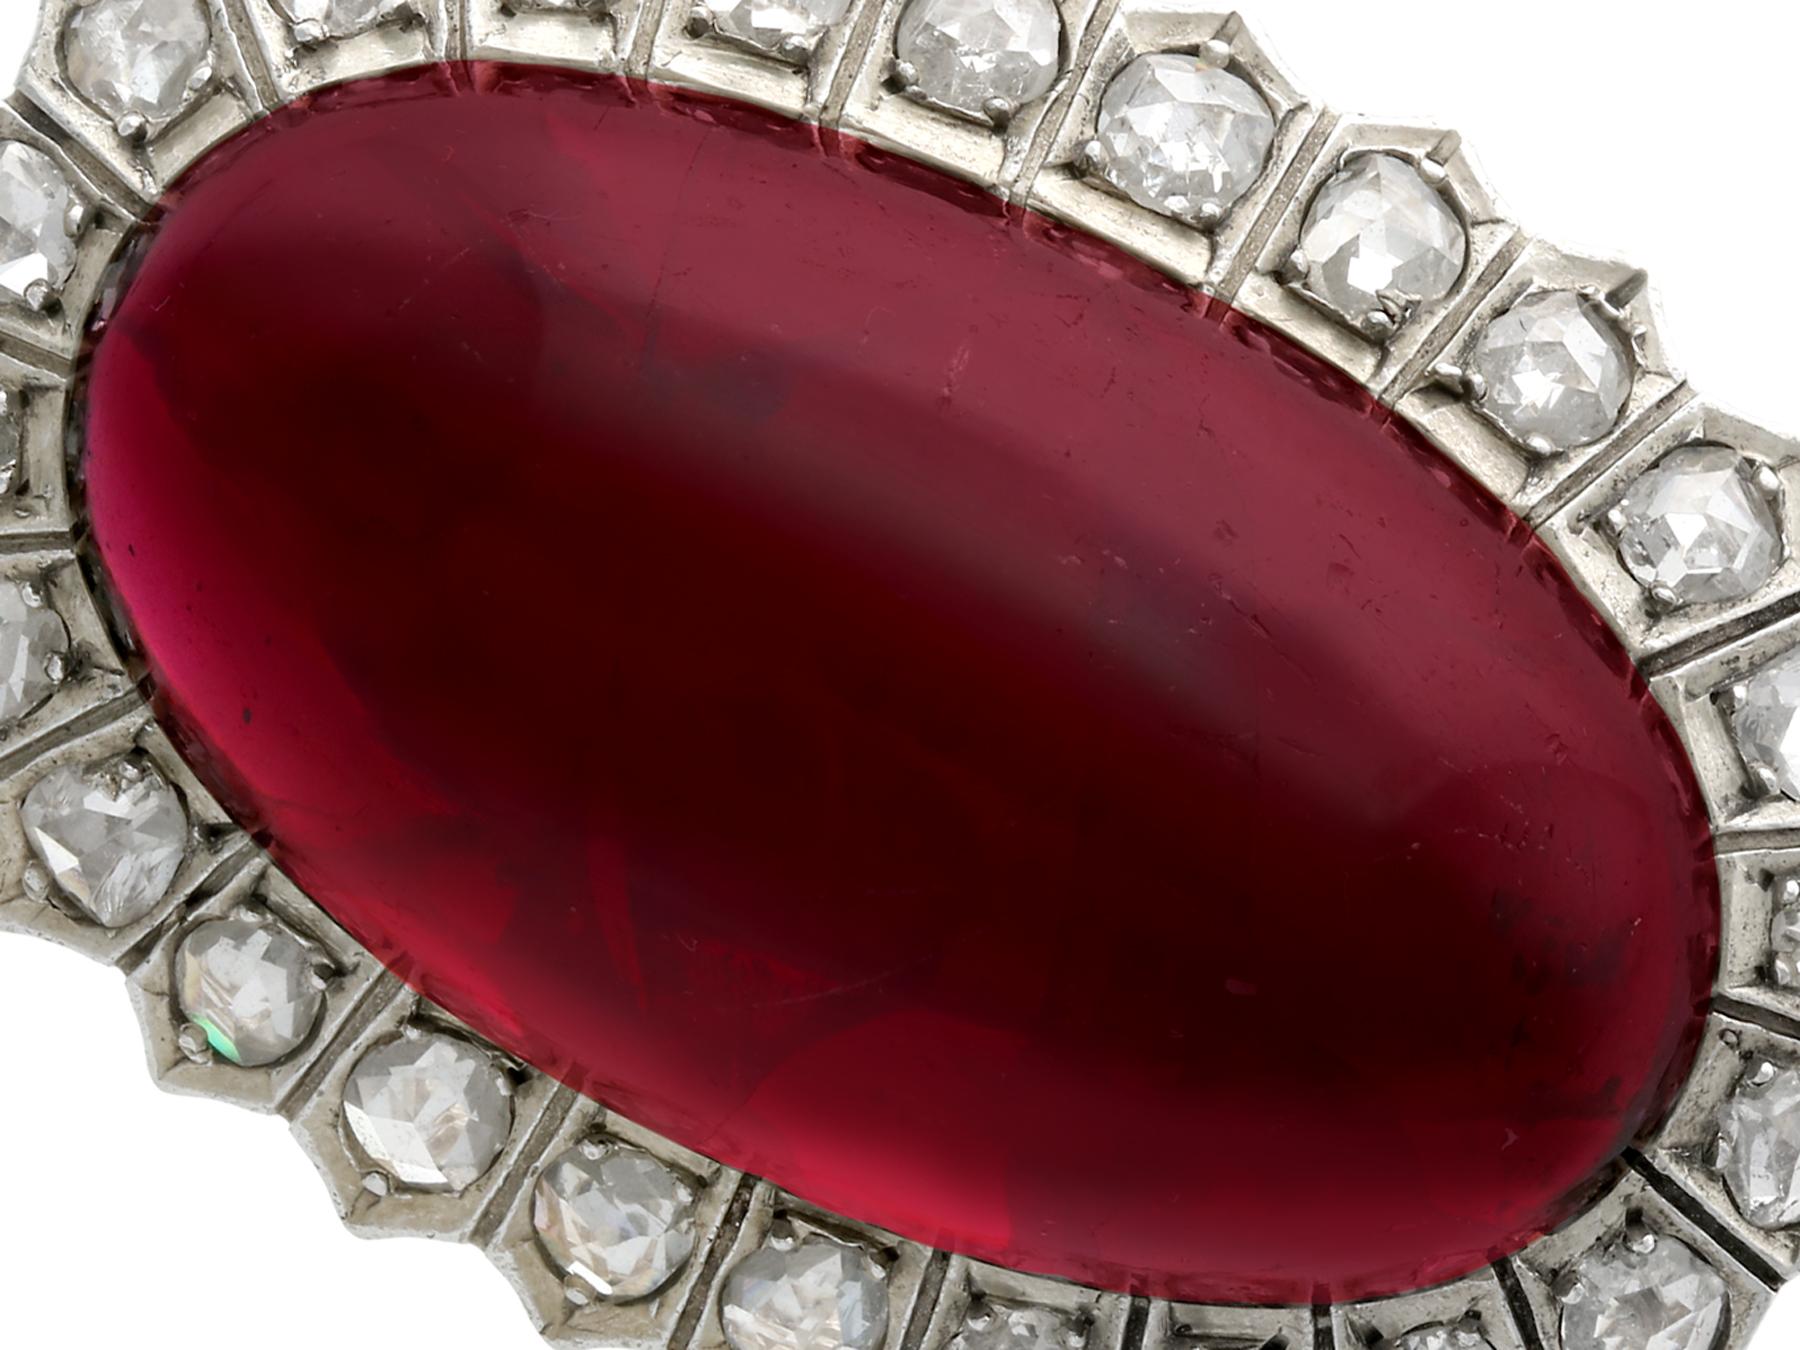 A stunning, fine, and impressive antique 33.88 carat garnet and 1.92 carat diamond 14 karat yellow gold brooch; part of our diverse antique jewelry collections.

This stunning, fine and impressive antique cabochon cut brooch has been crafted in 18k